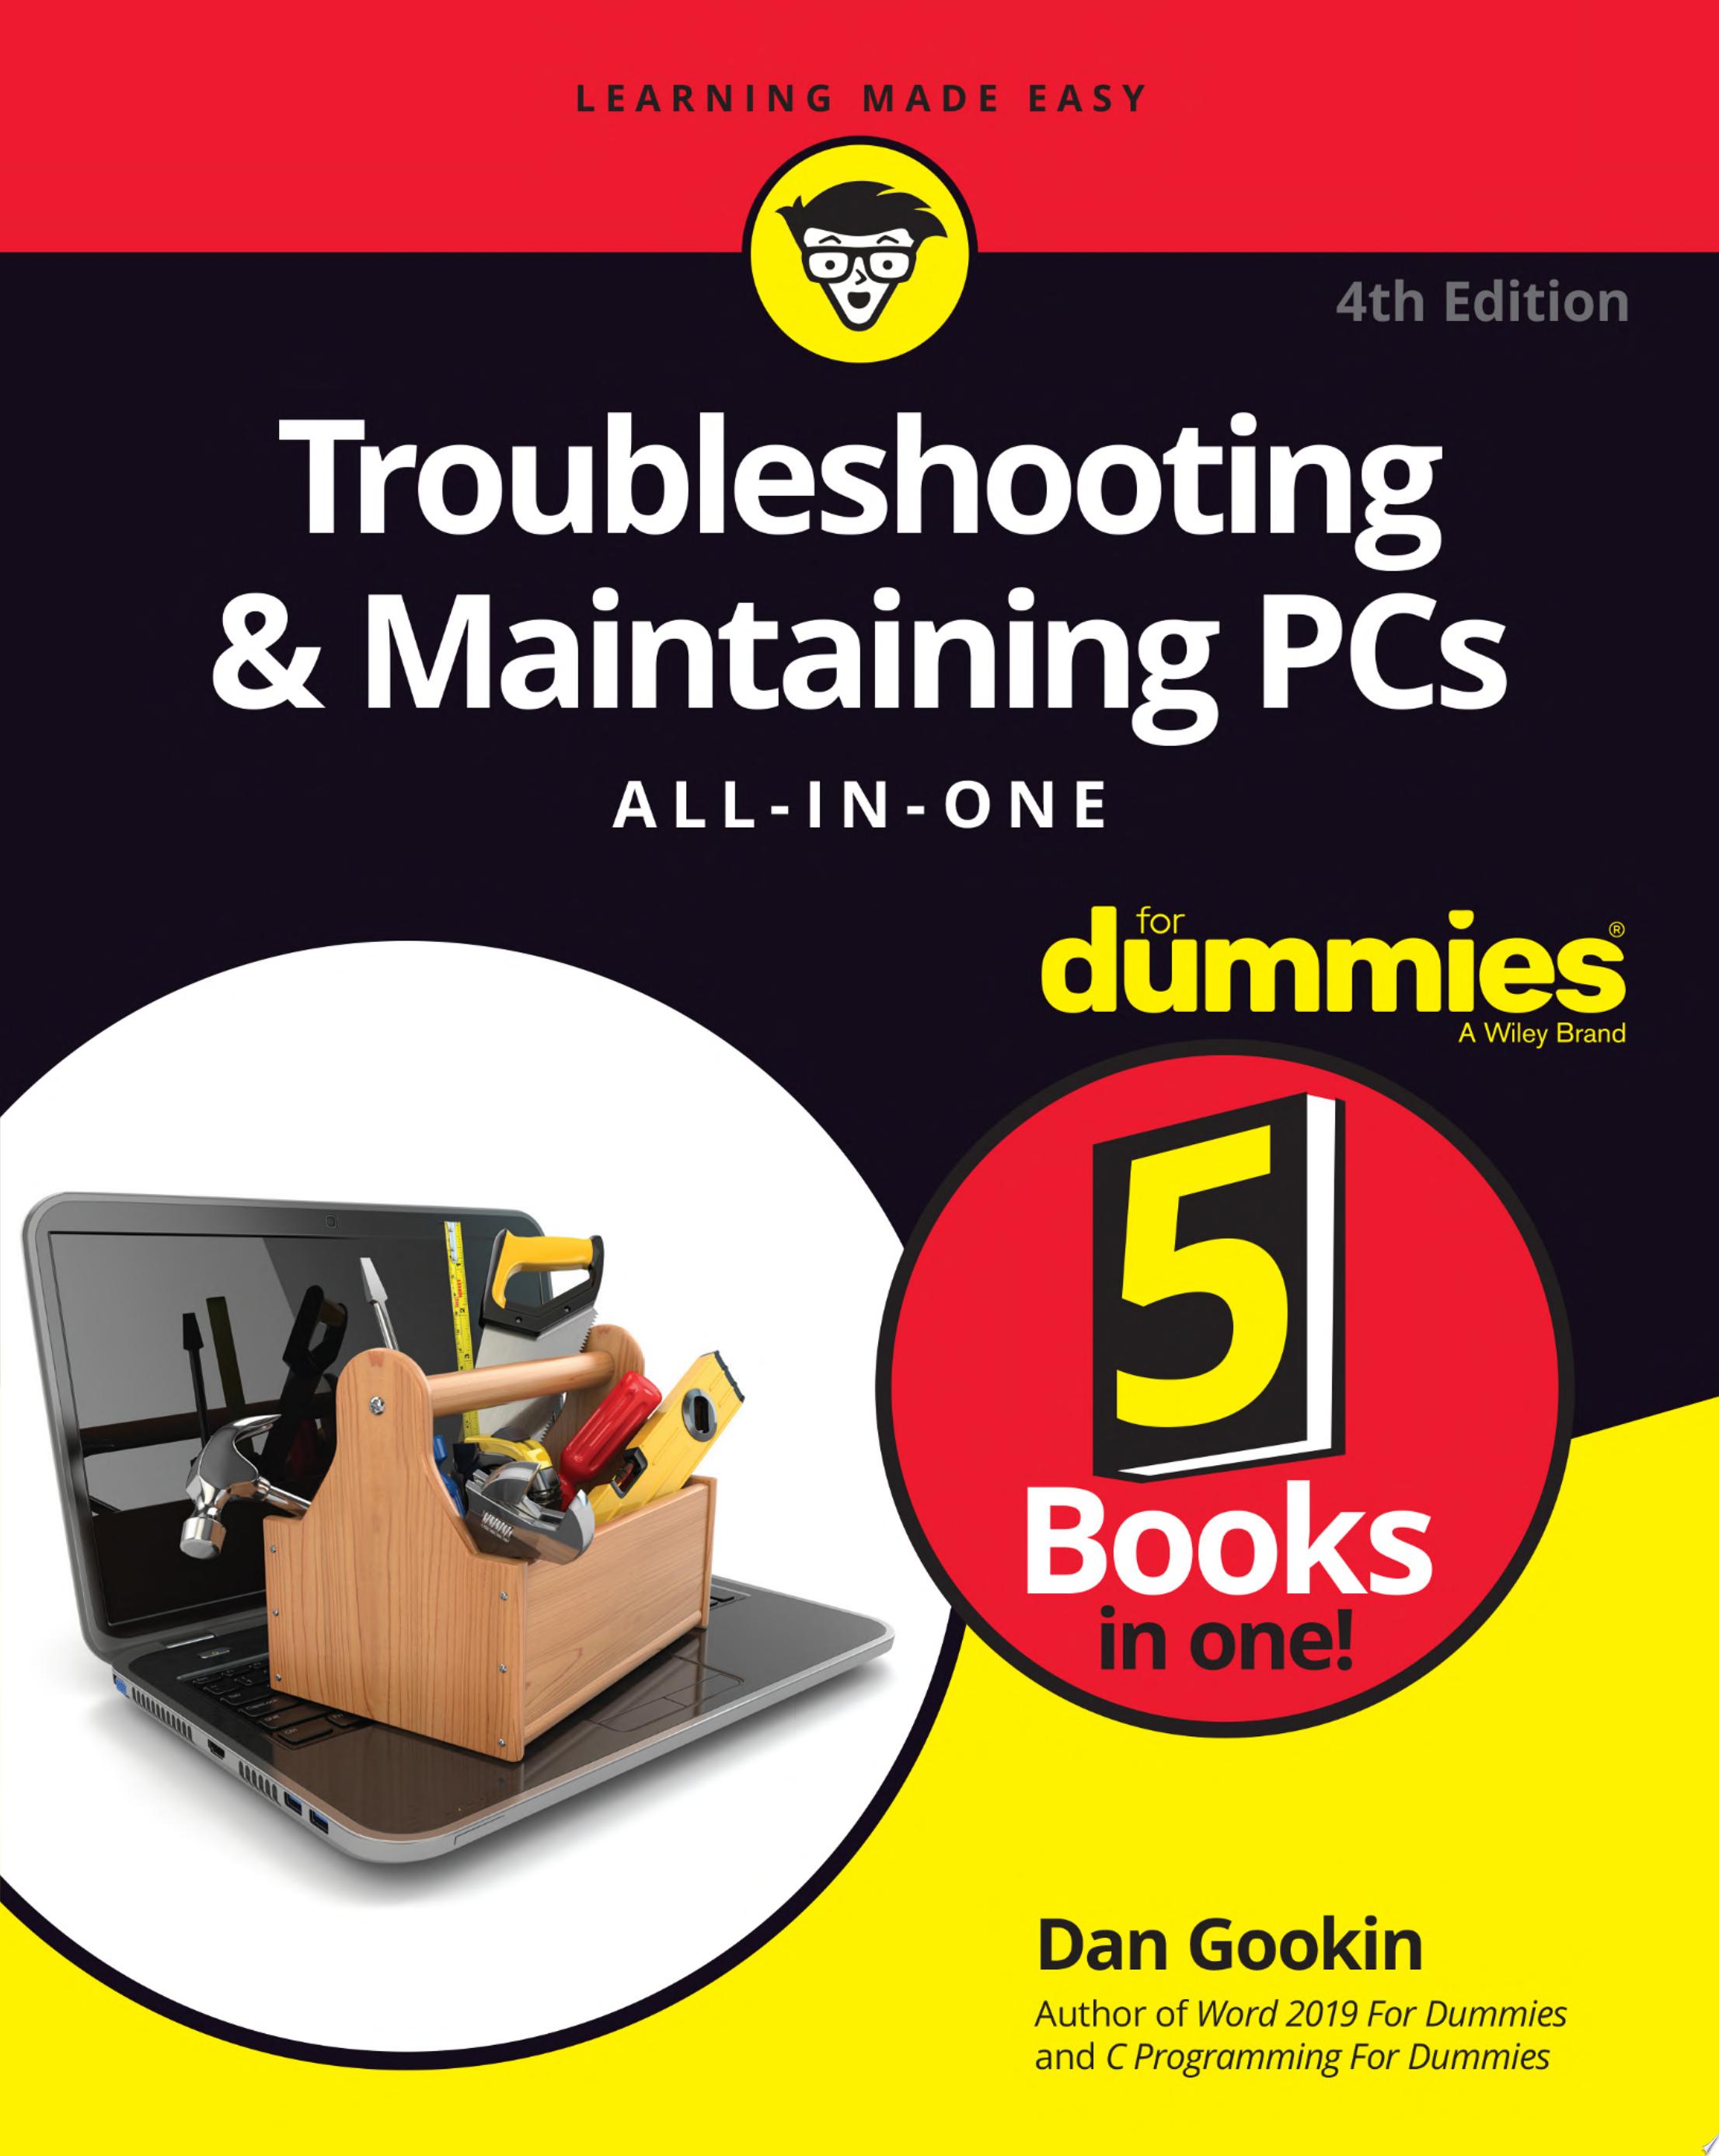 Image for "Troubleshooting & Maintaining PCs All-in-One For Dummies"